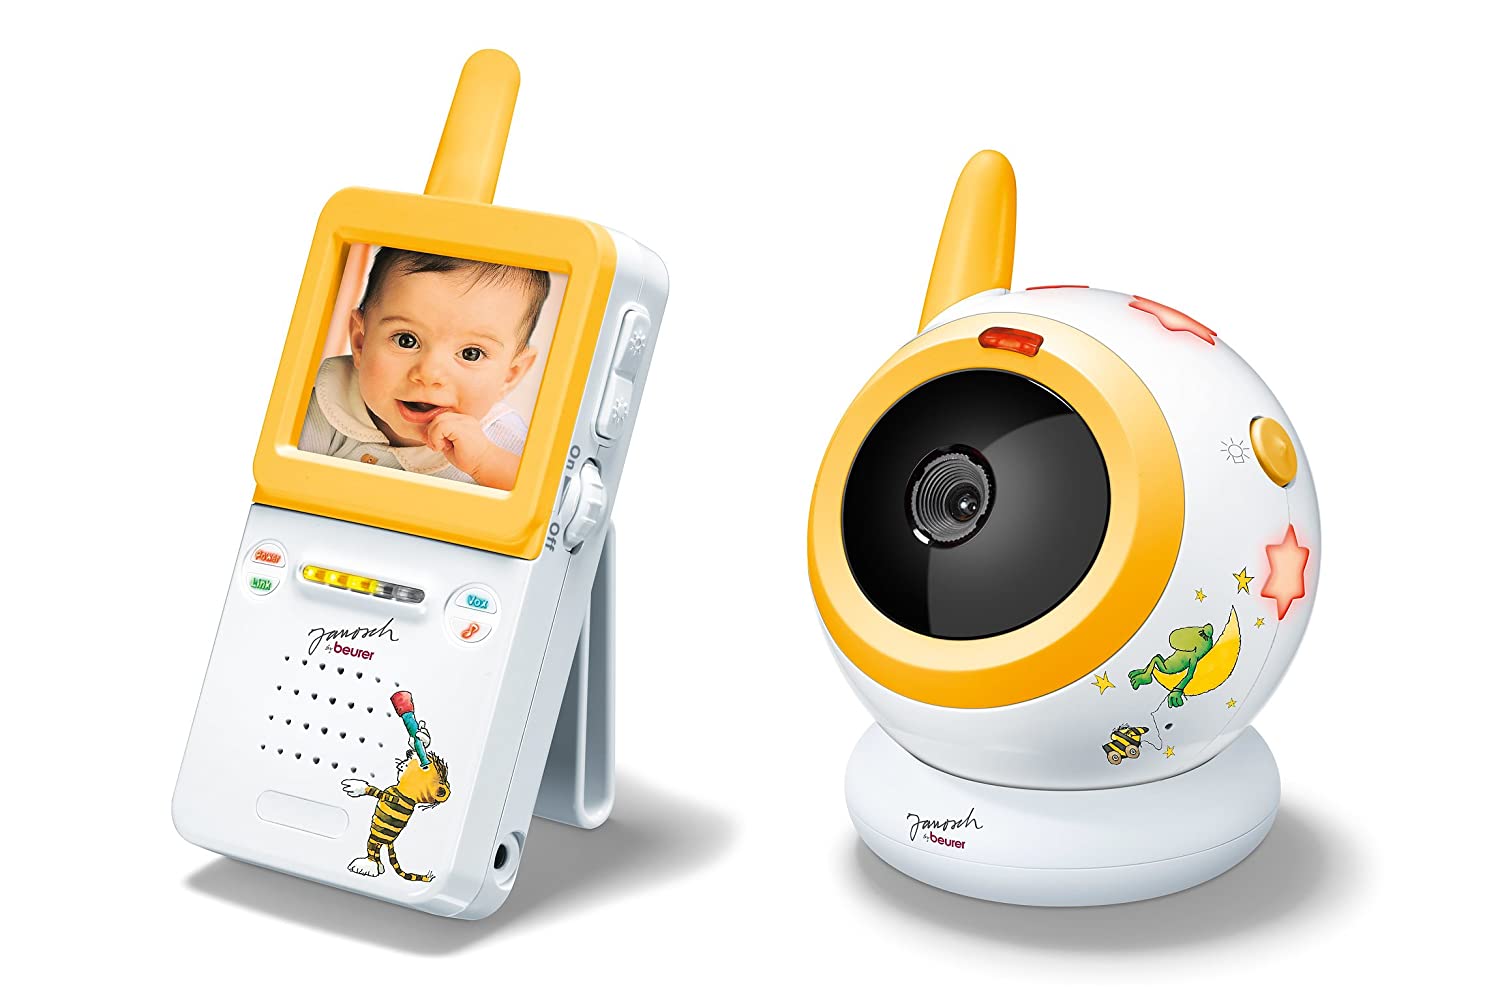 Janosch by Beurer JBY 100 Video Baby Monitor